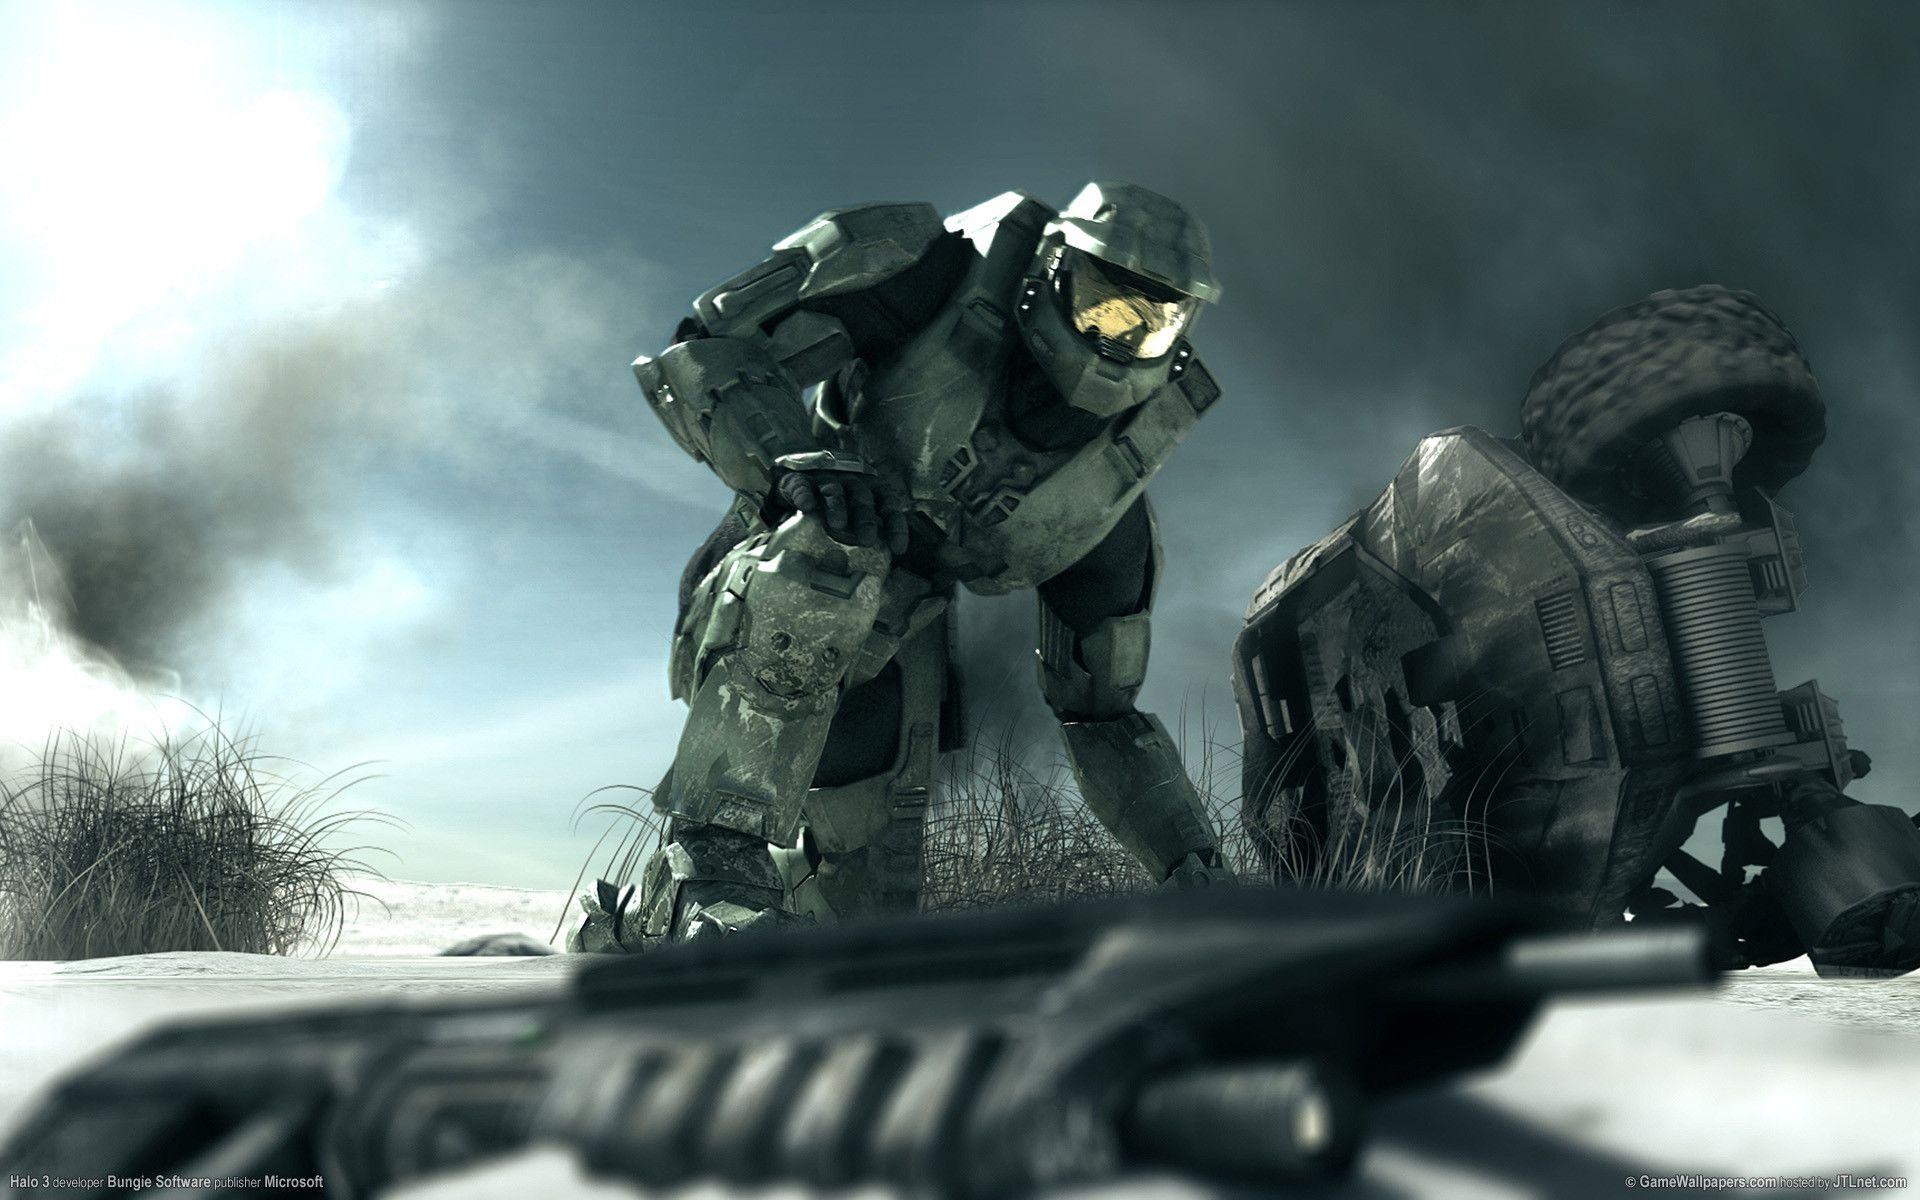 Video Game Halo 3 HD Wallpaper Video Game Halo 3 HQ